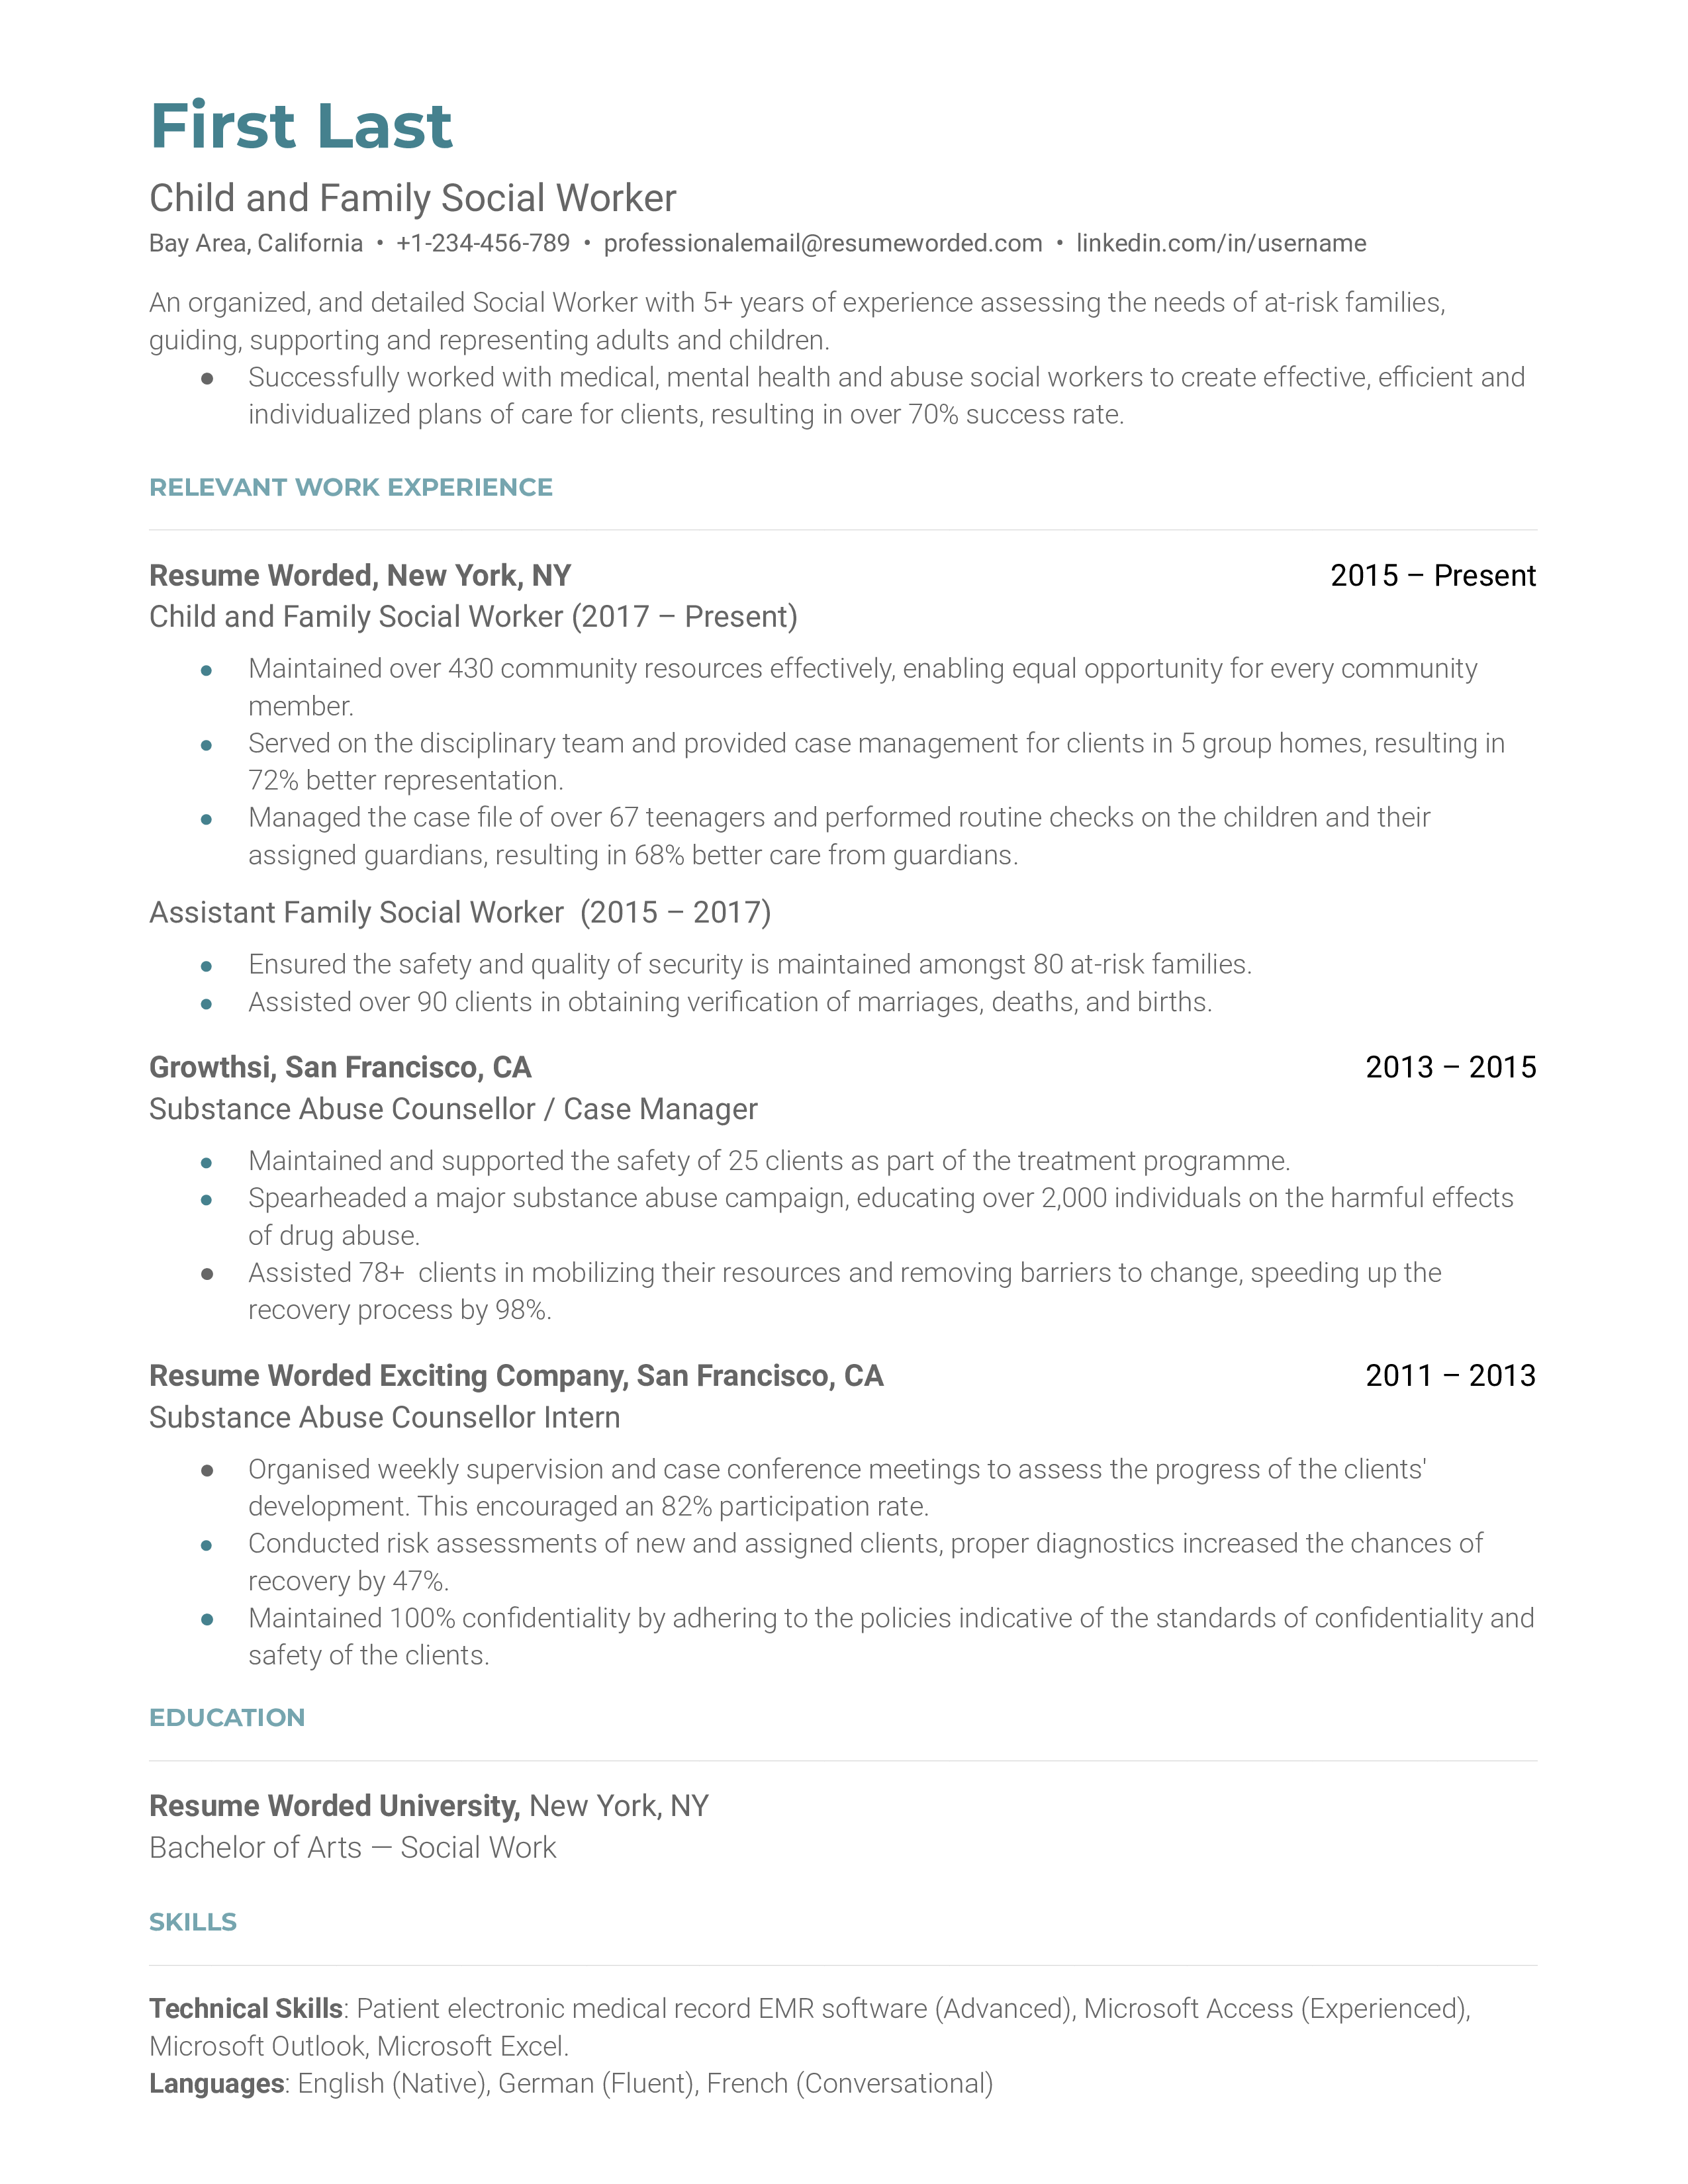 Child and Family Social Worker Resume Sample